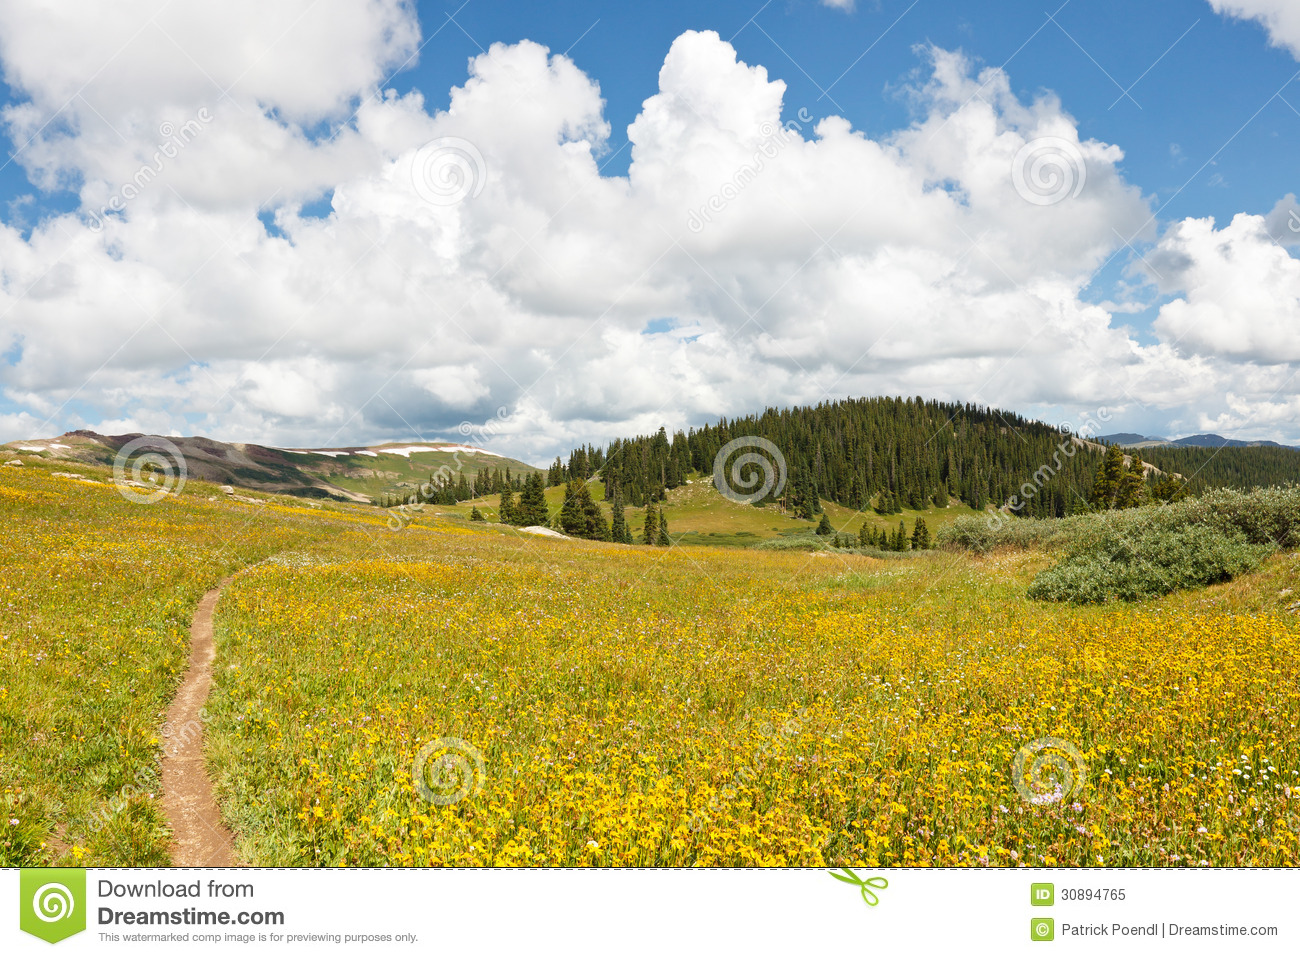 Trail Through Meadows Of Wildflowers Royalty Free Stock Photo   Image    